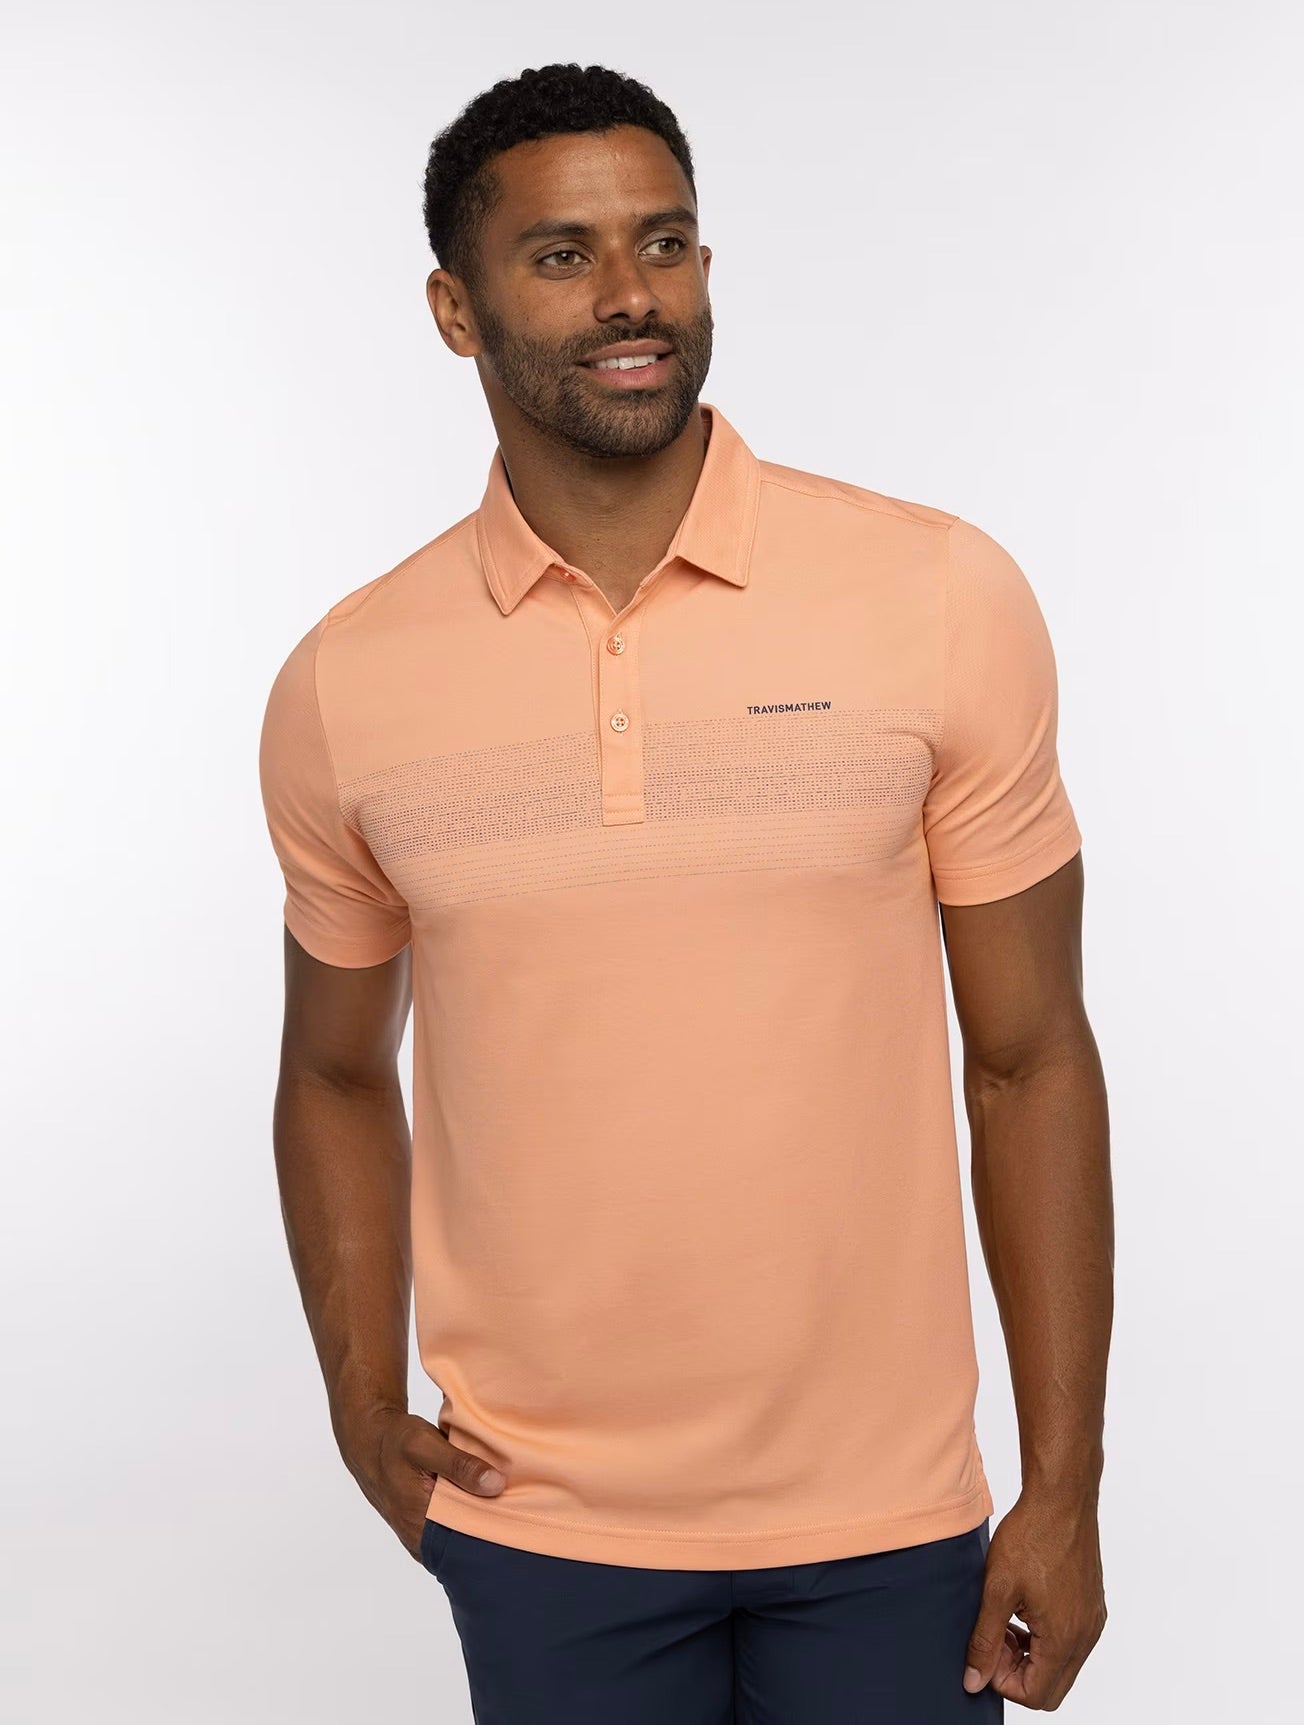 The Travis Mathew MESA CENTRAL Polo is constructed from high-quality fabric blends, which provides a stylish look while also delivering superior performance and comfort. 